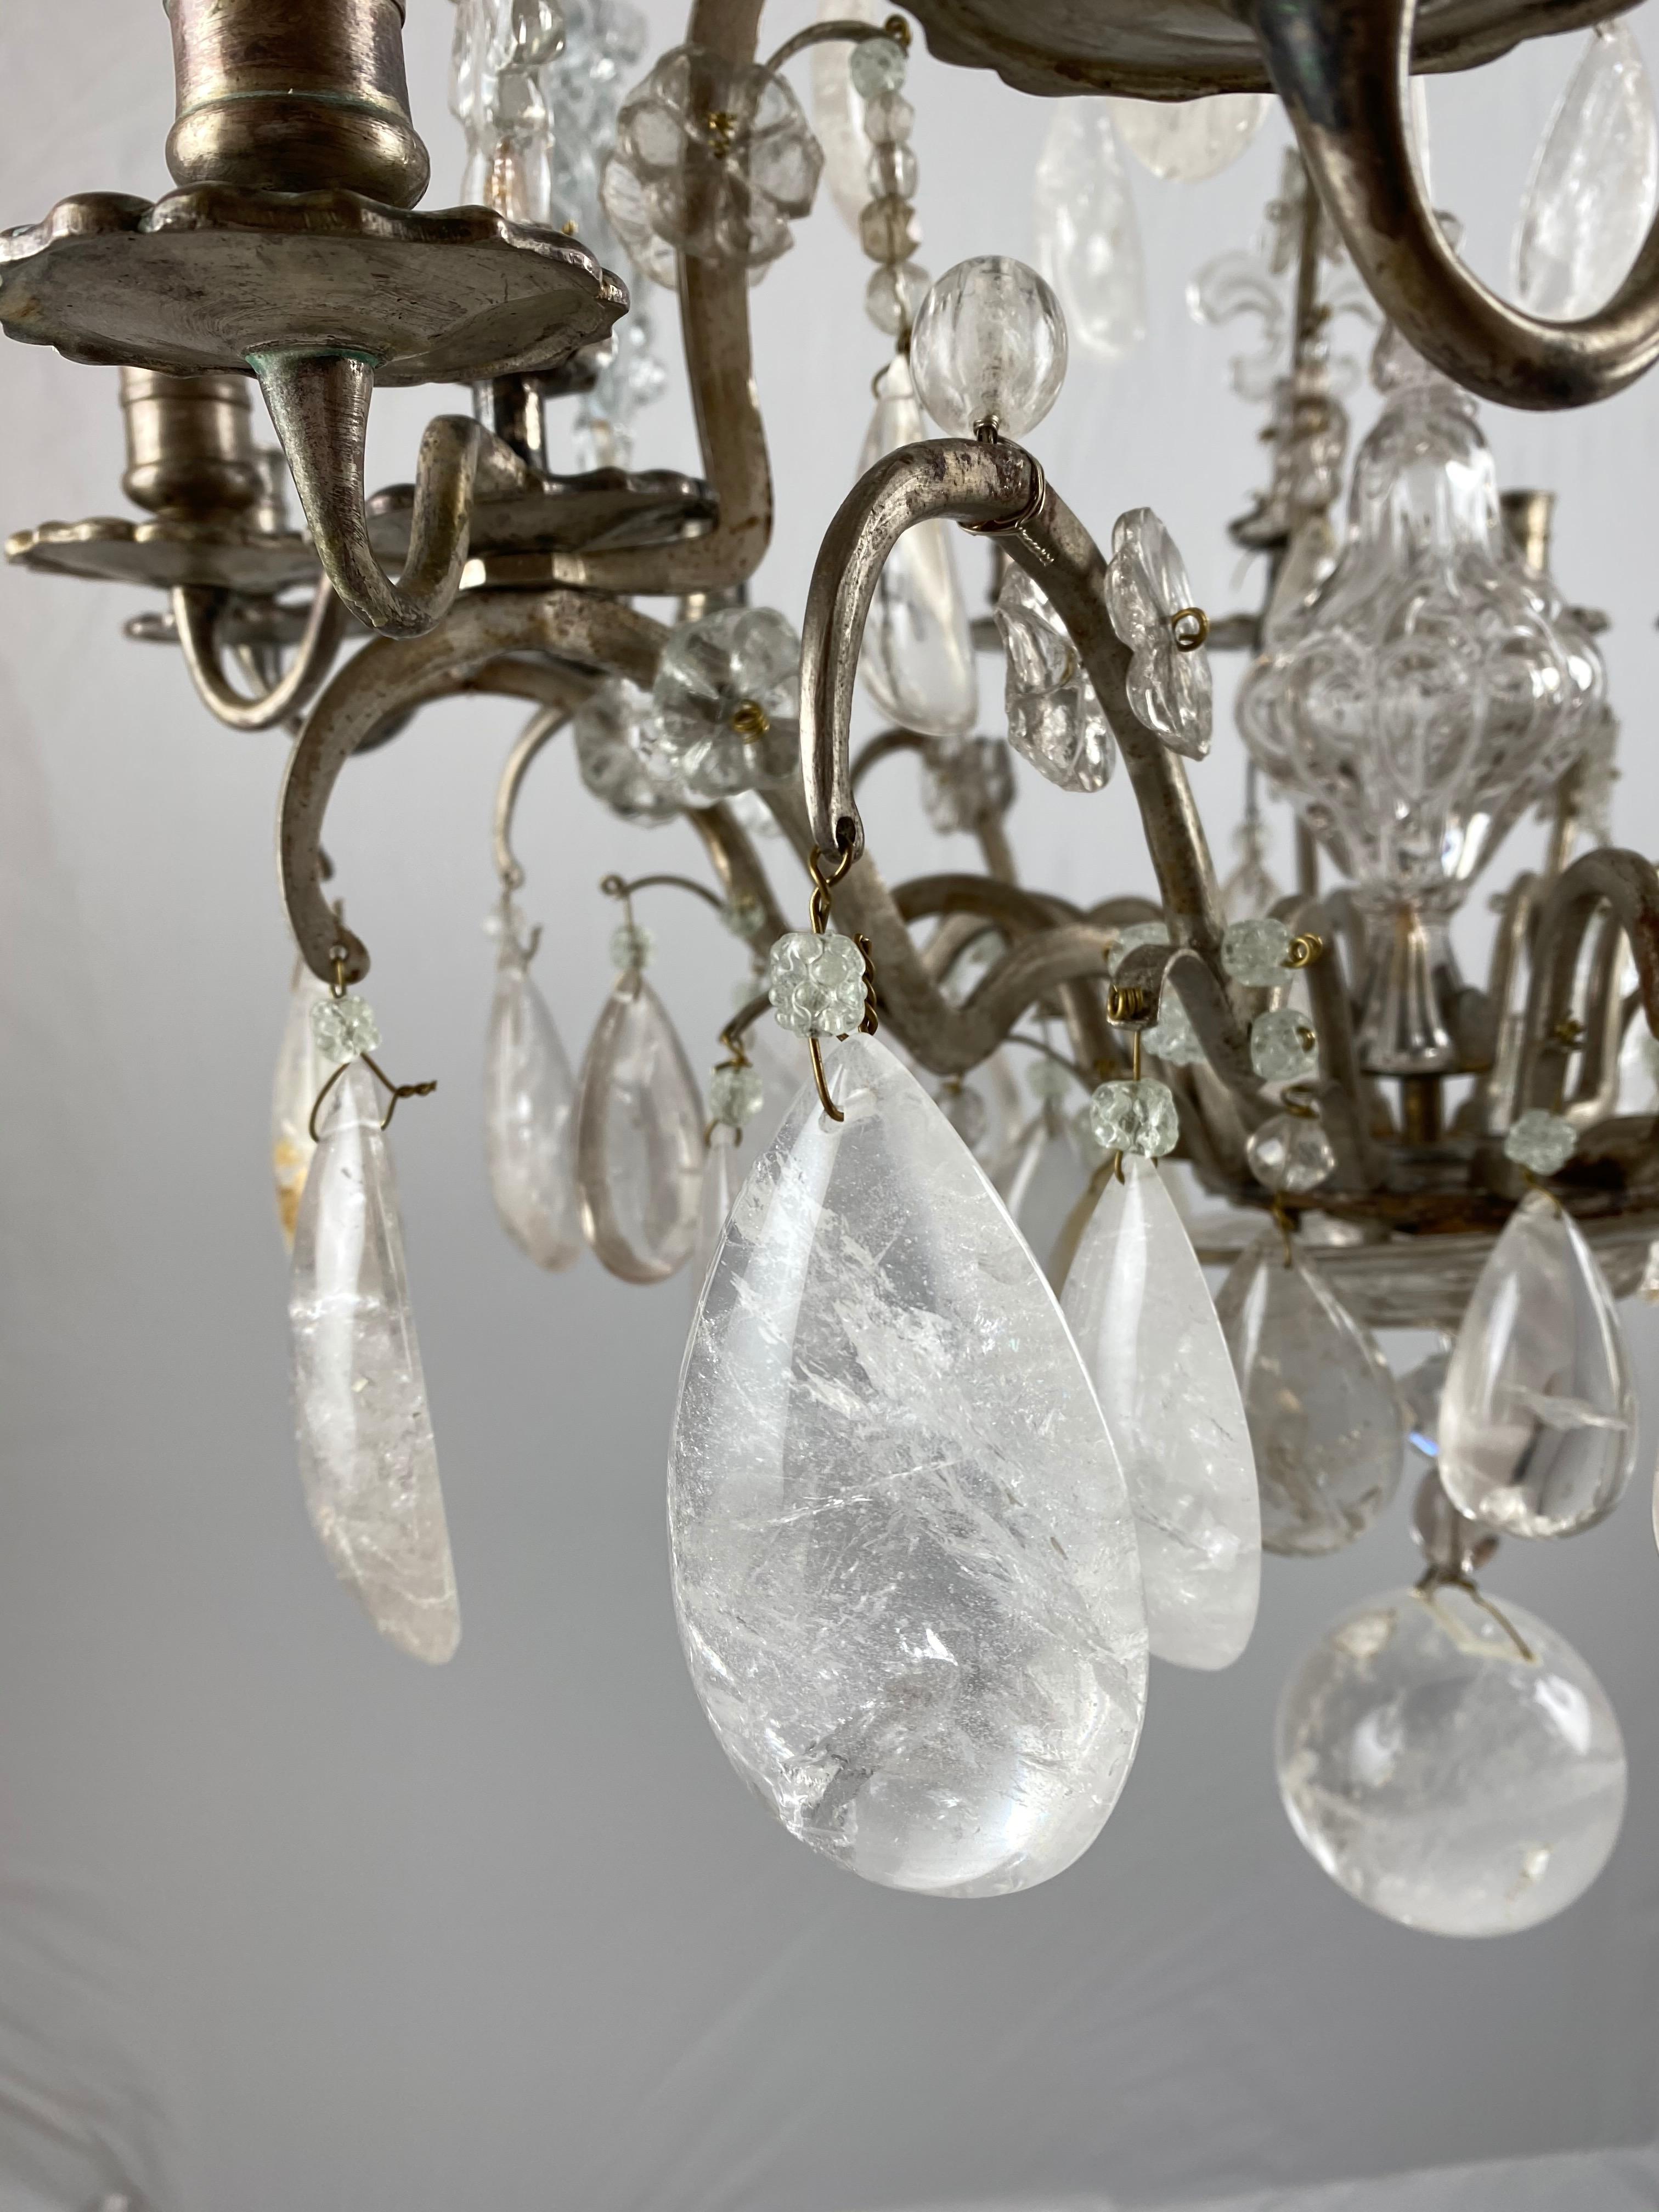 A fine mid-18th century chandelier. The metal frame is made of silvered brass with a fine patina. The chandelier has rock crystal pendants, round, pear and eggshaped.